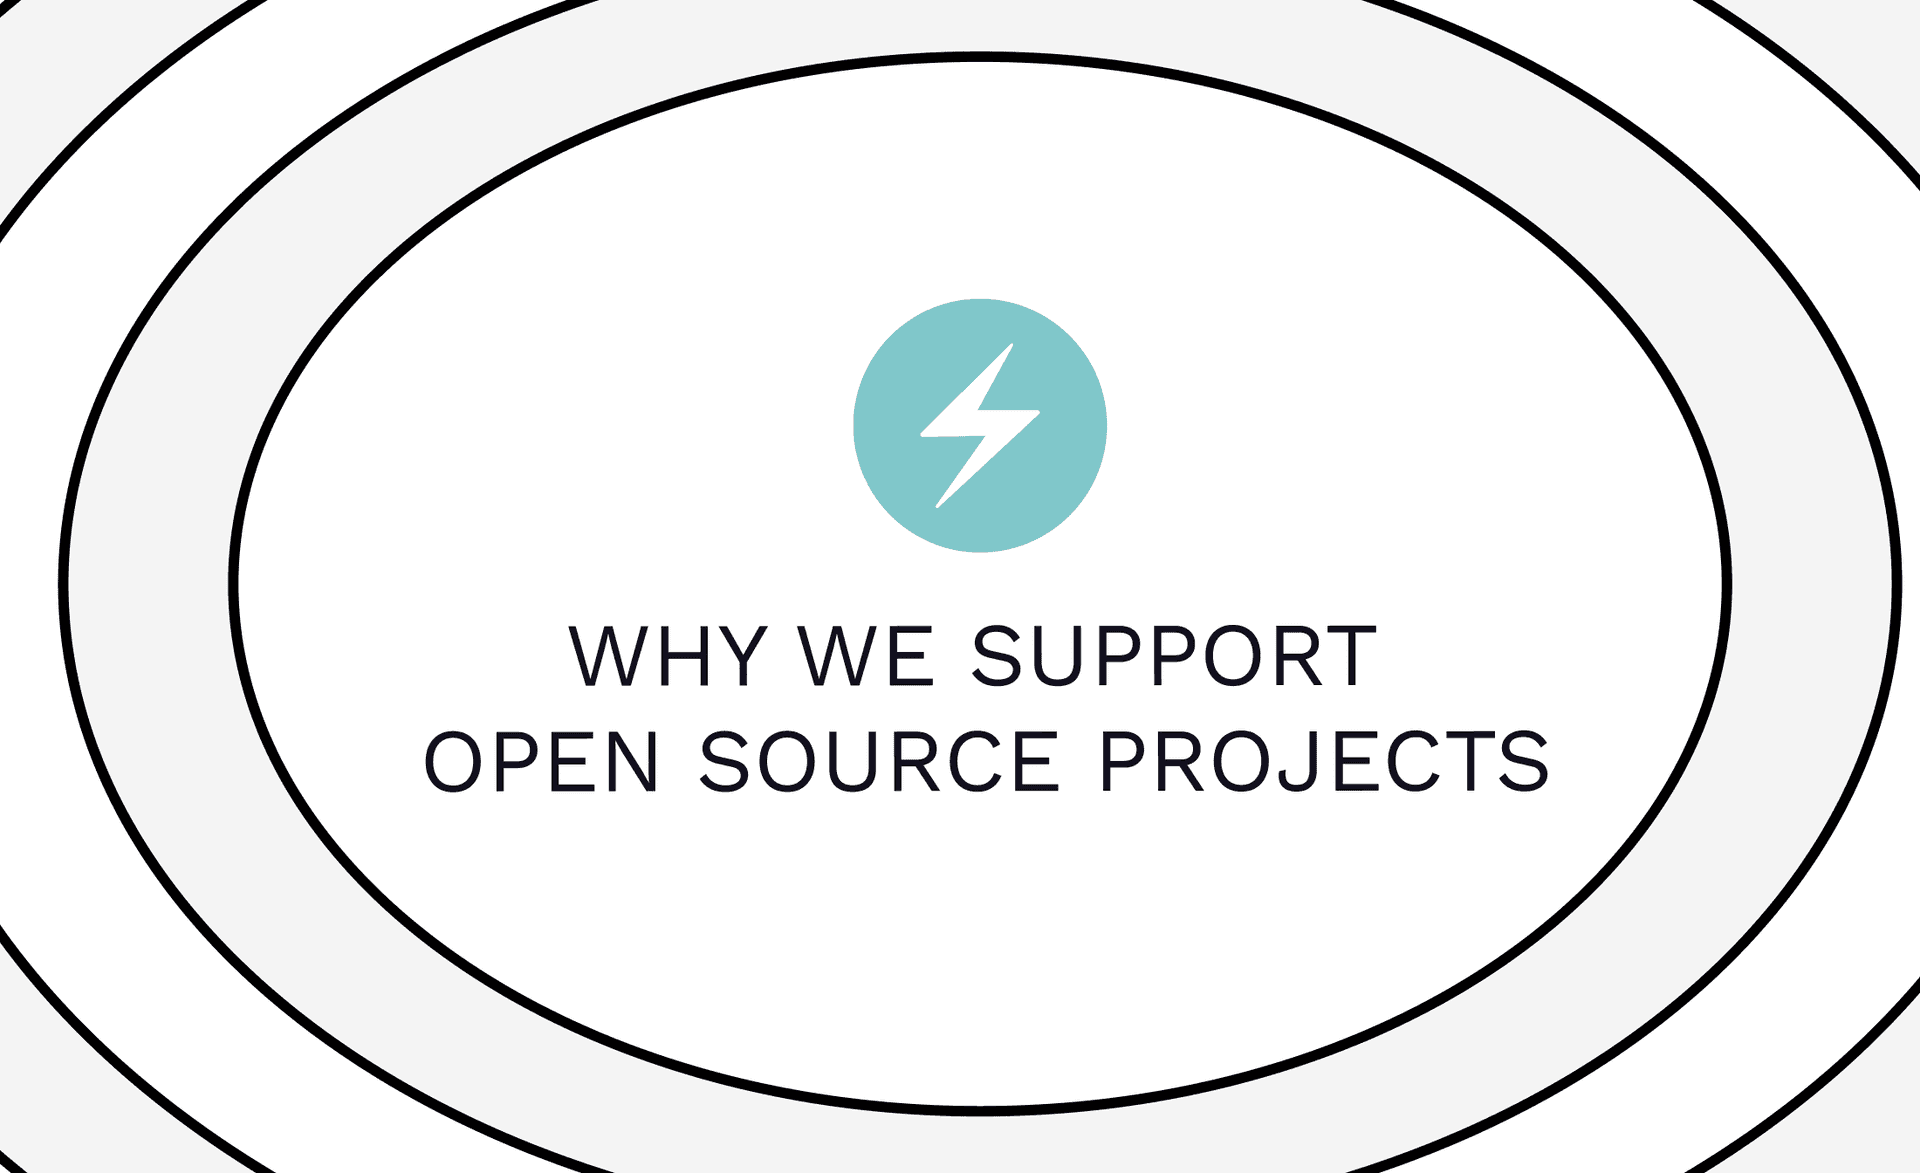 Why We Support Open Source Projects